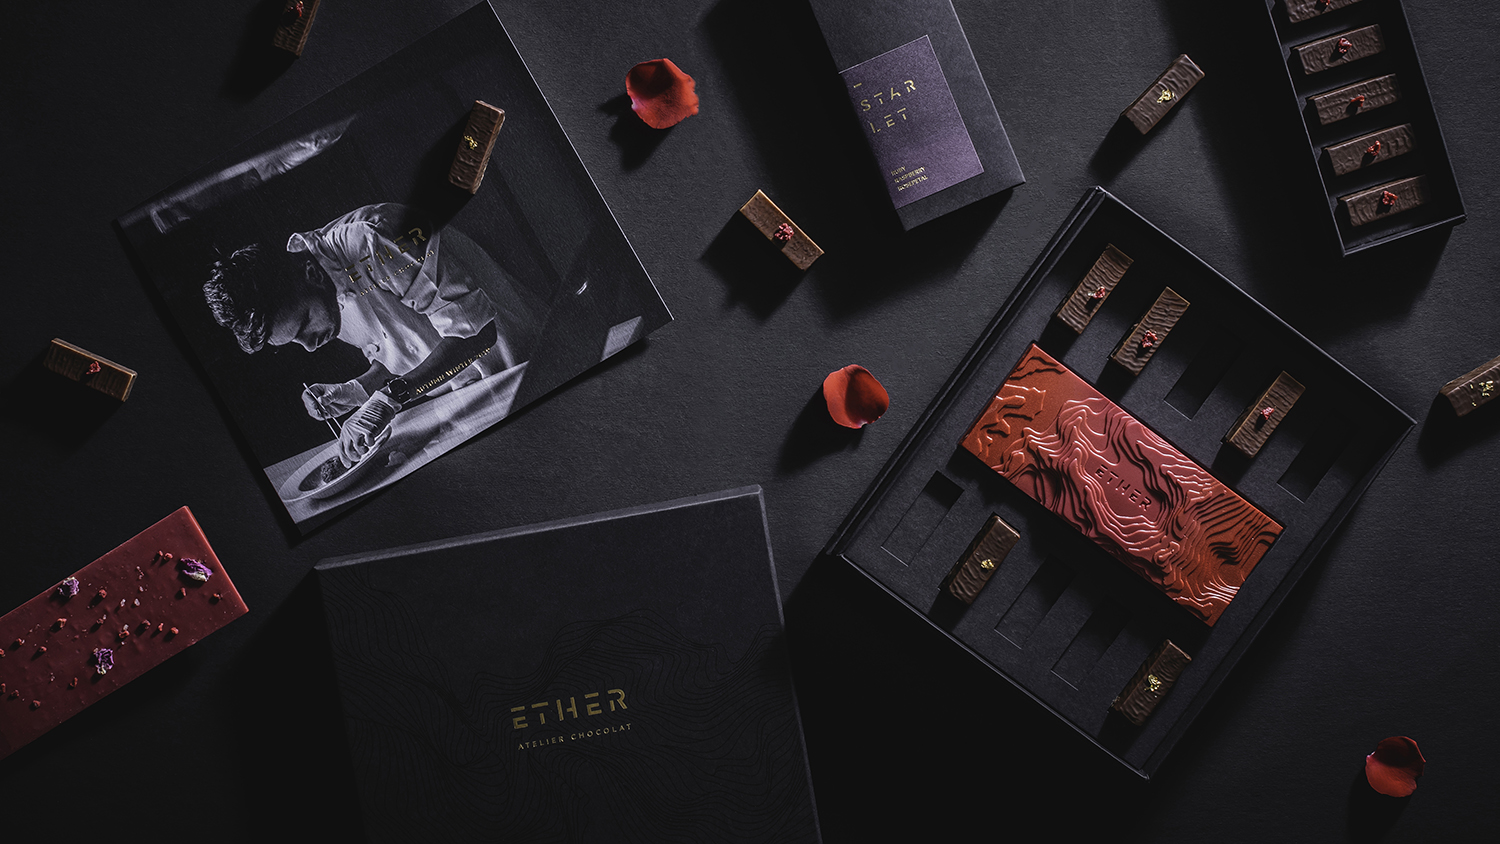 Brand Design for Irresistible Artisanal Ether Atelier Chocolat by Design Stack